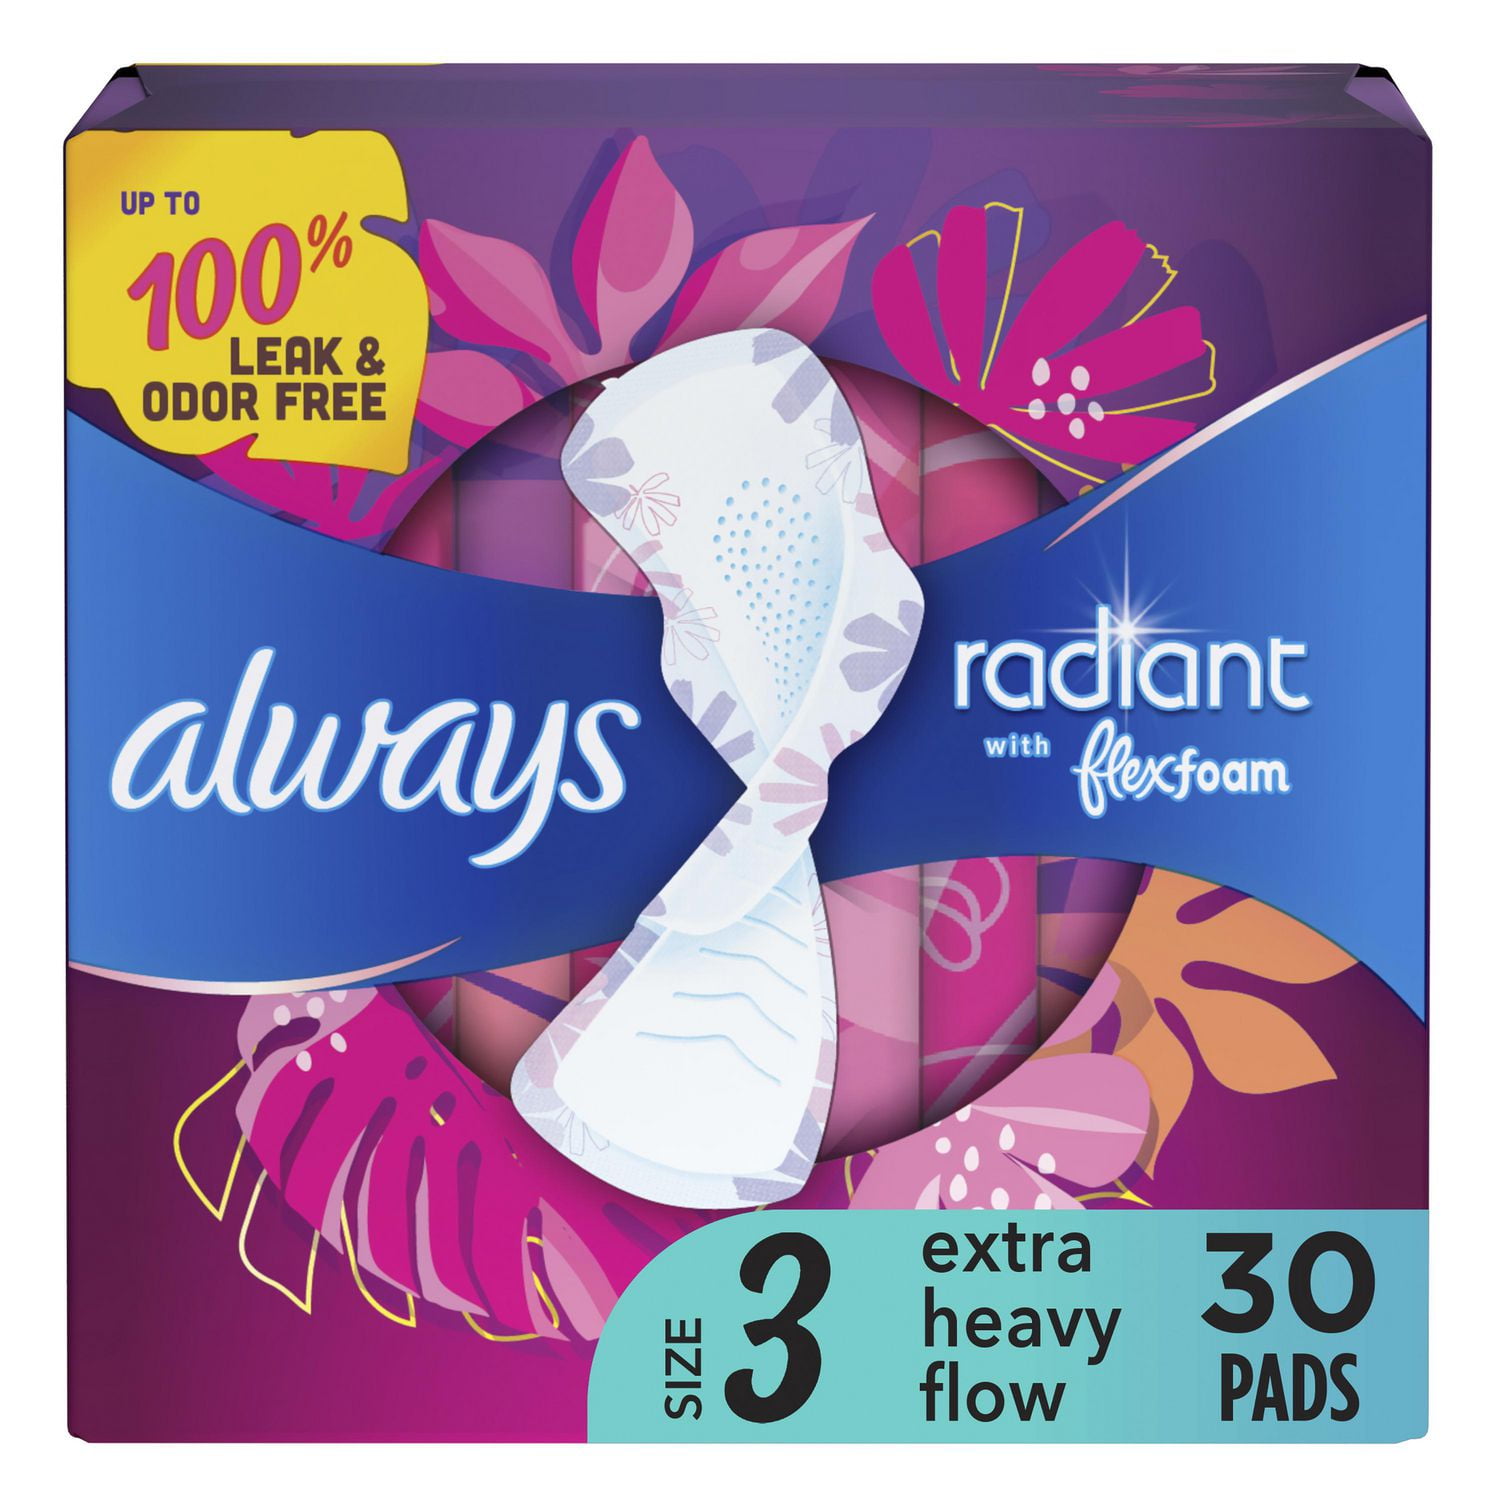 Always Radiant Feminine Pads for Women, Size 3 Extra Heavy, with